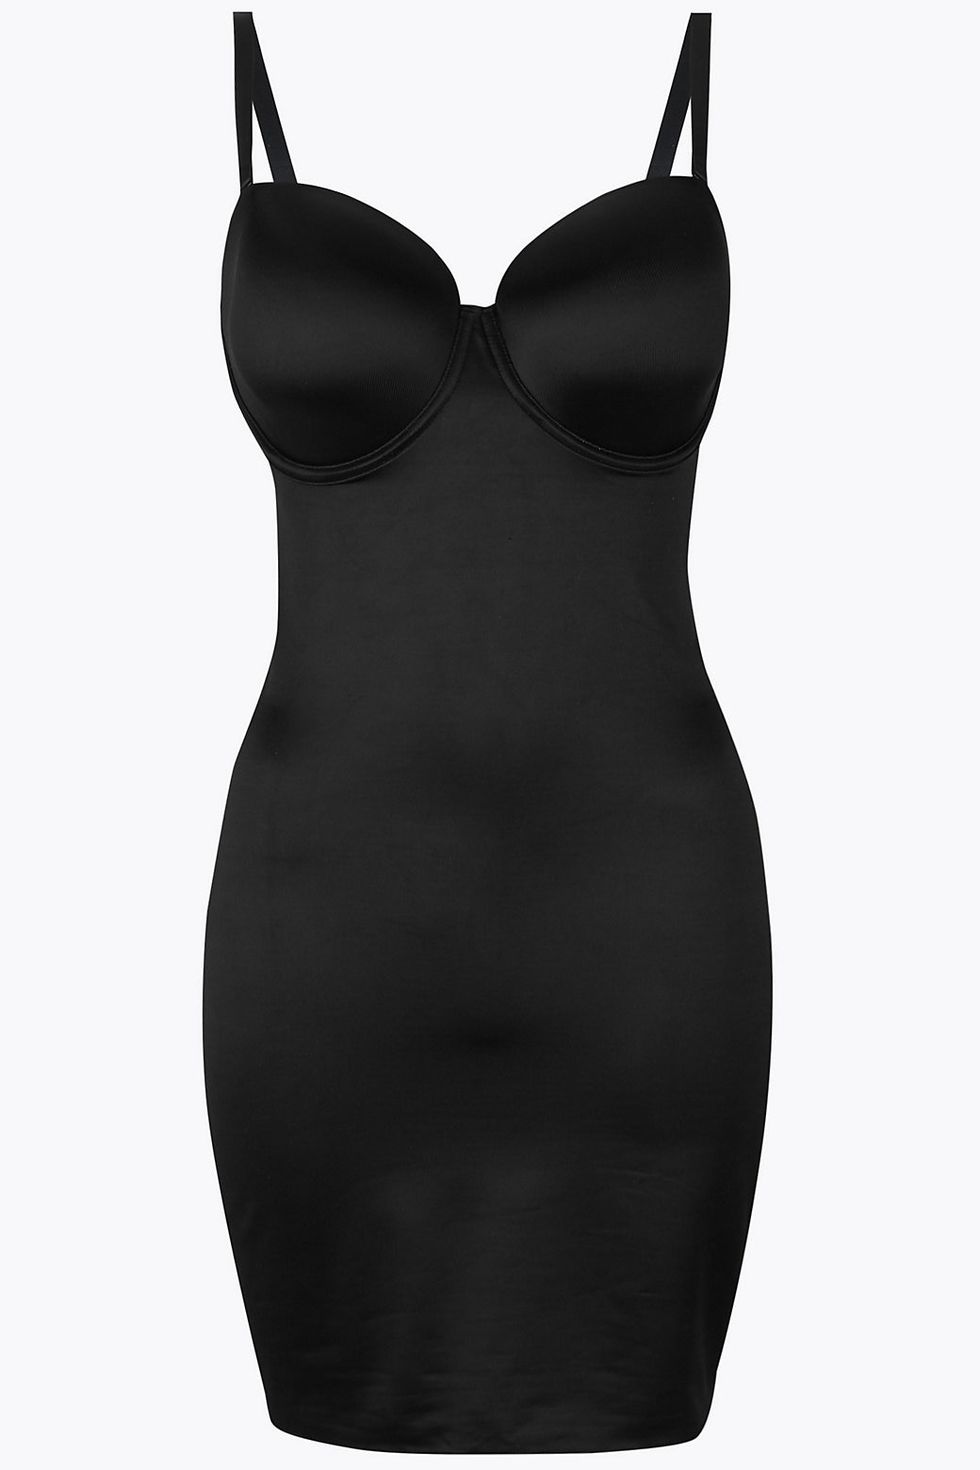 Marks and Spencer body shapewear 36C black with good firming control M&S  $29 (UP $120), Women's Fashion, New Undergarments & Loungewear on Carousell